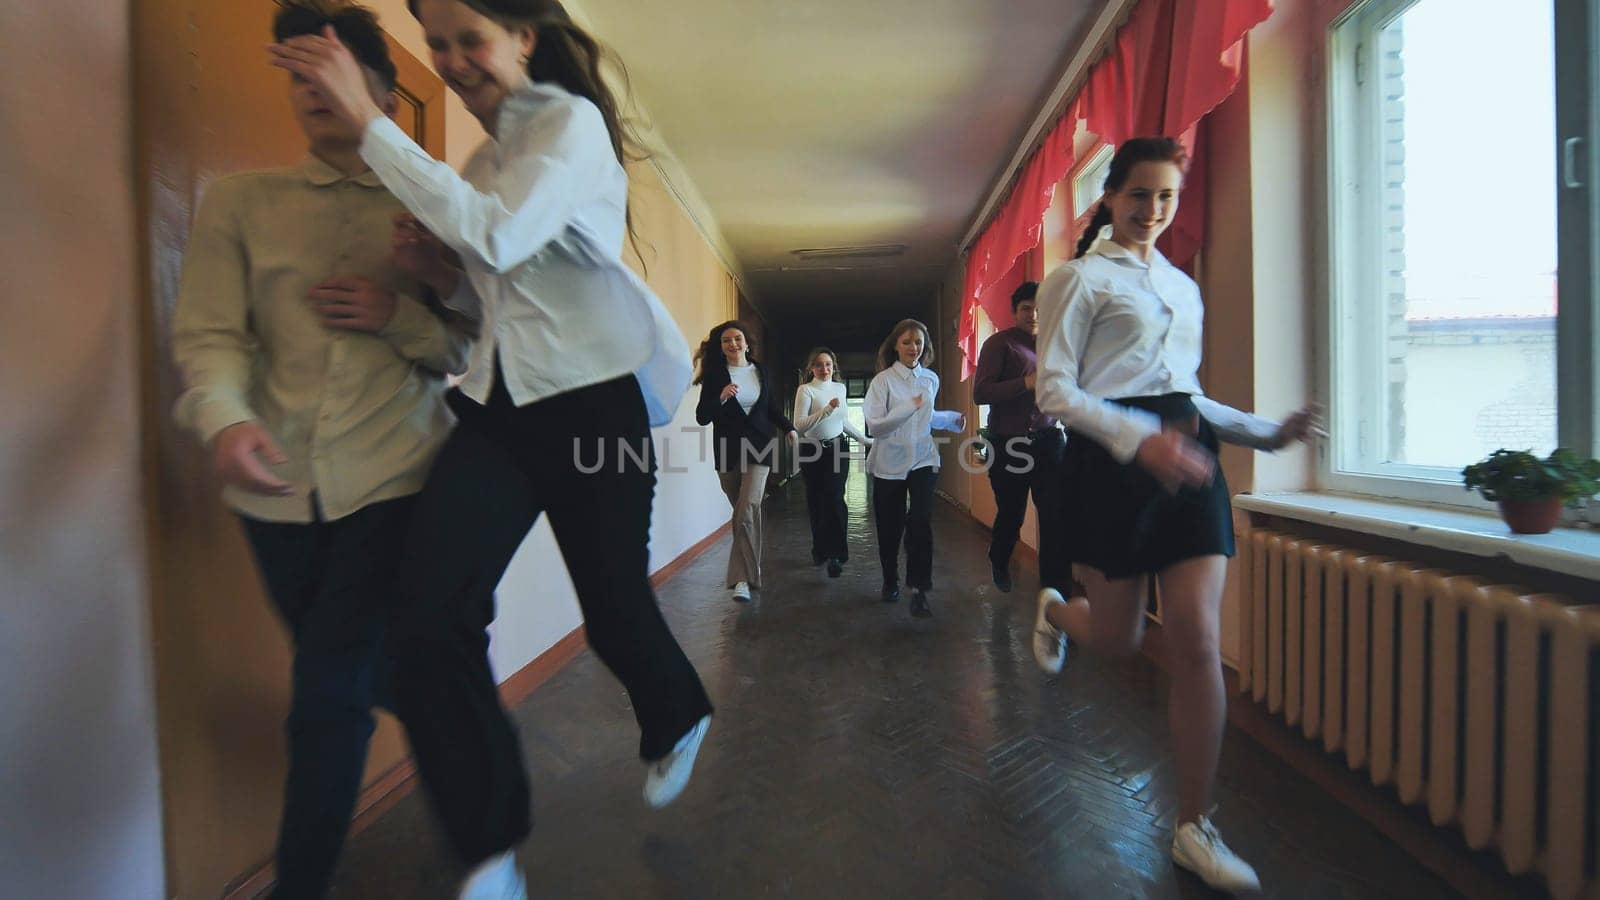 A down-syndrome school boy with group of children in corridor, running. by DovidPro